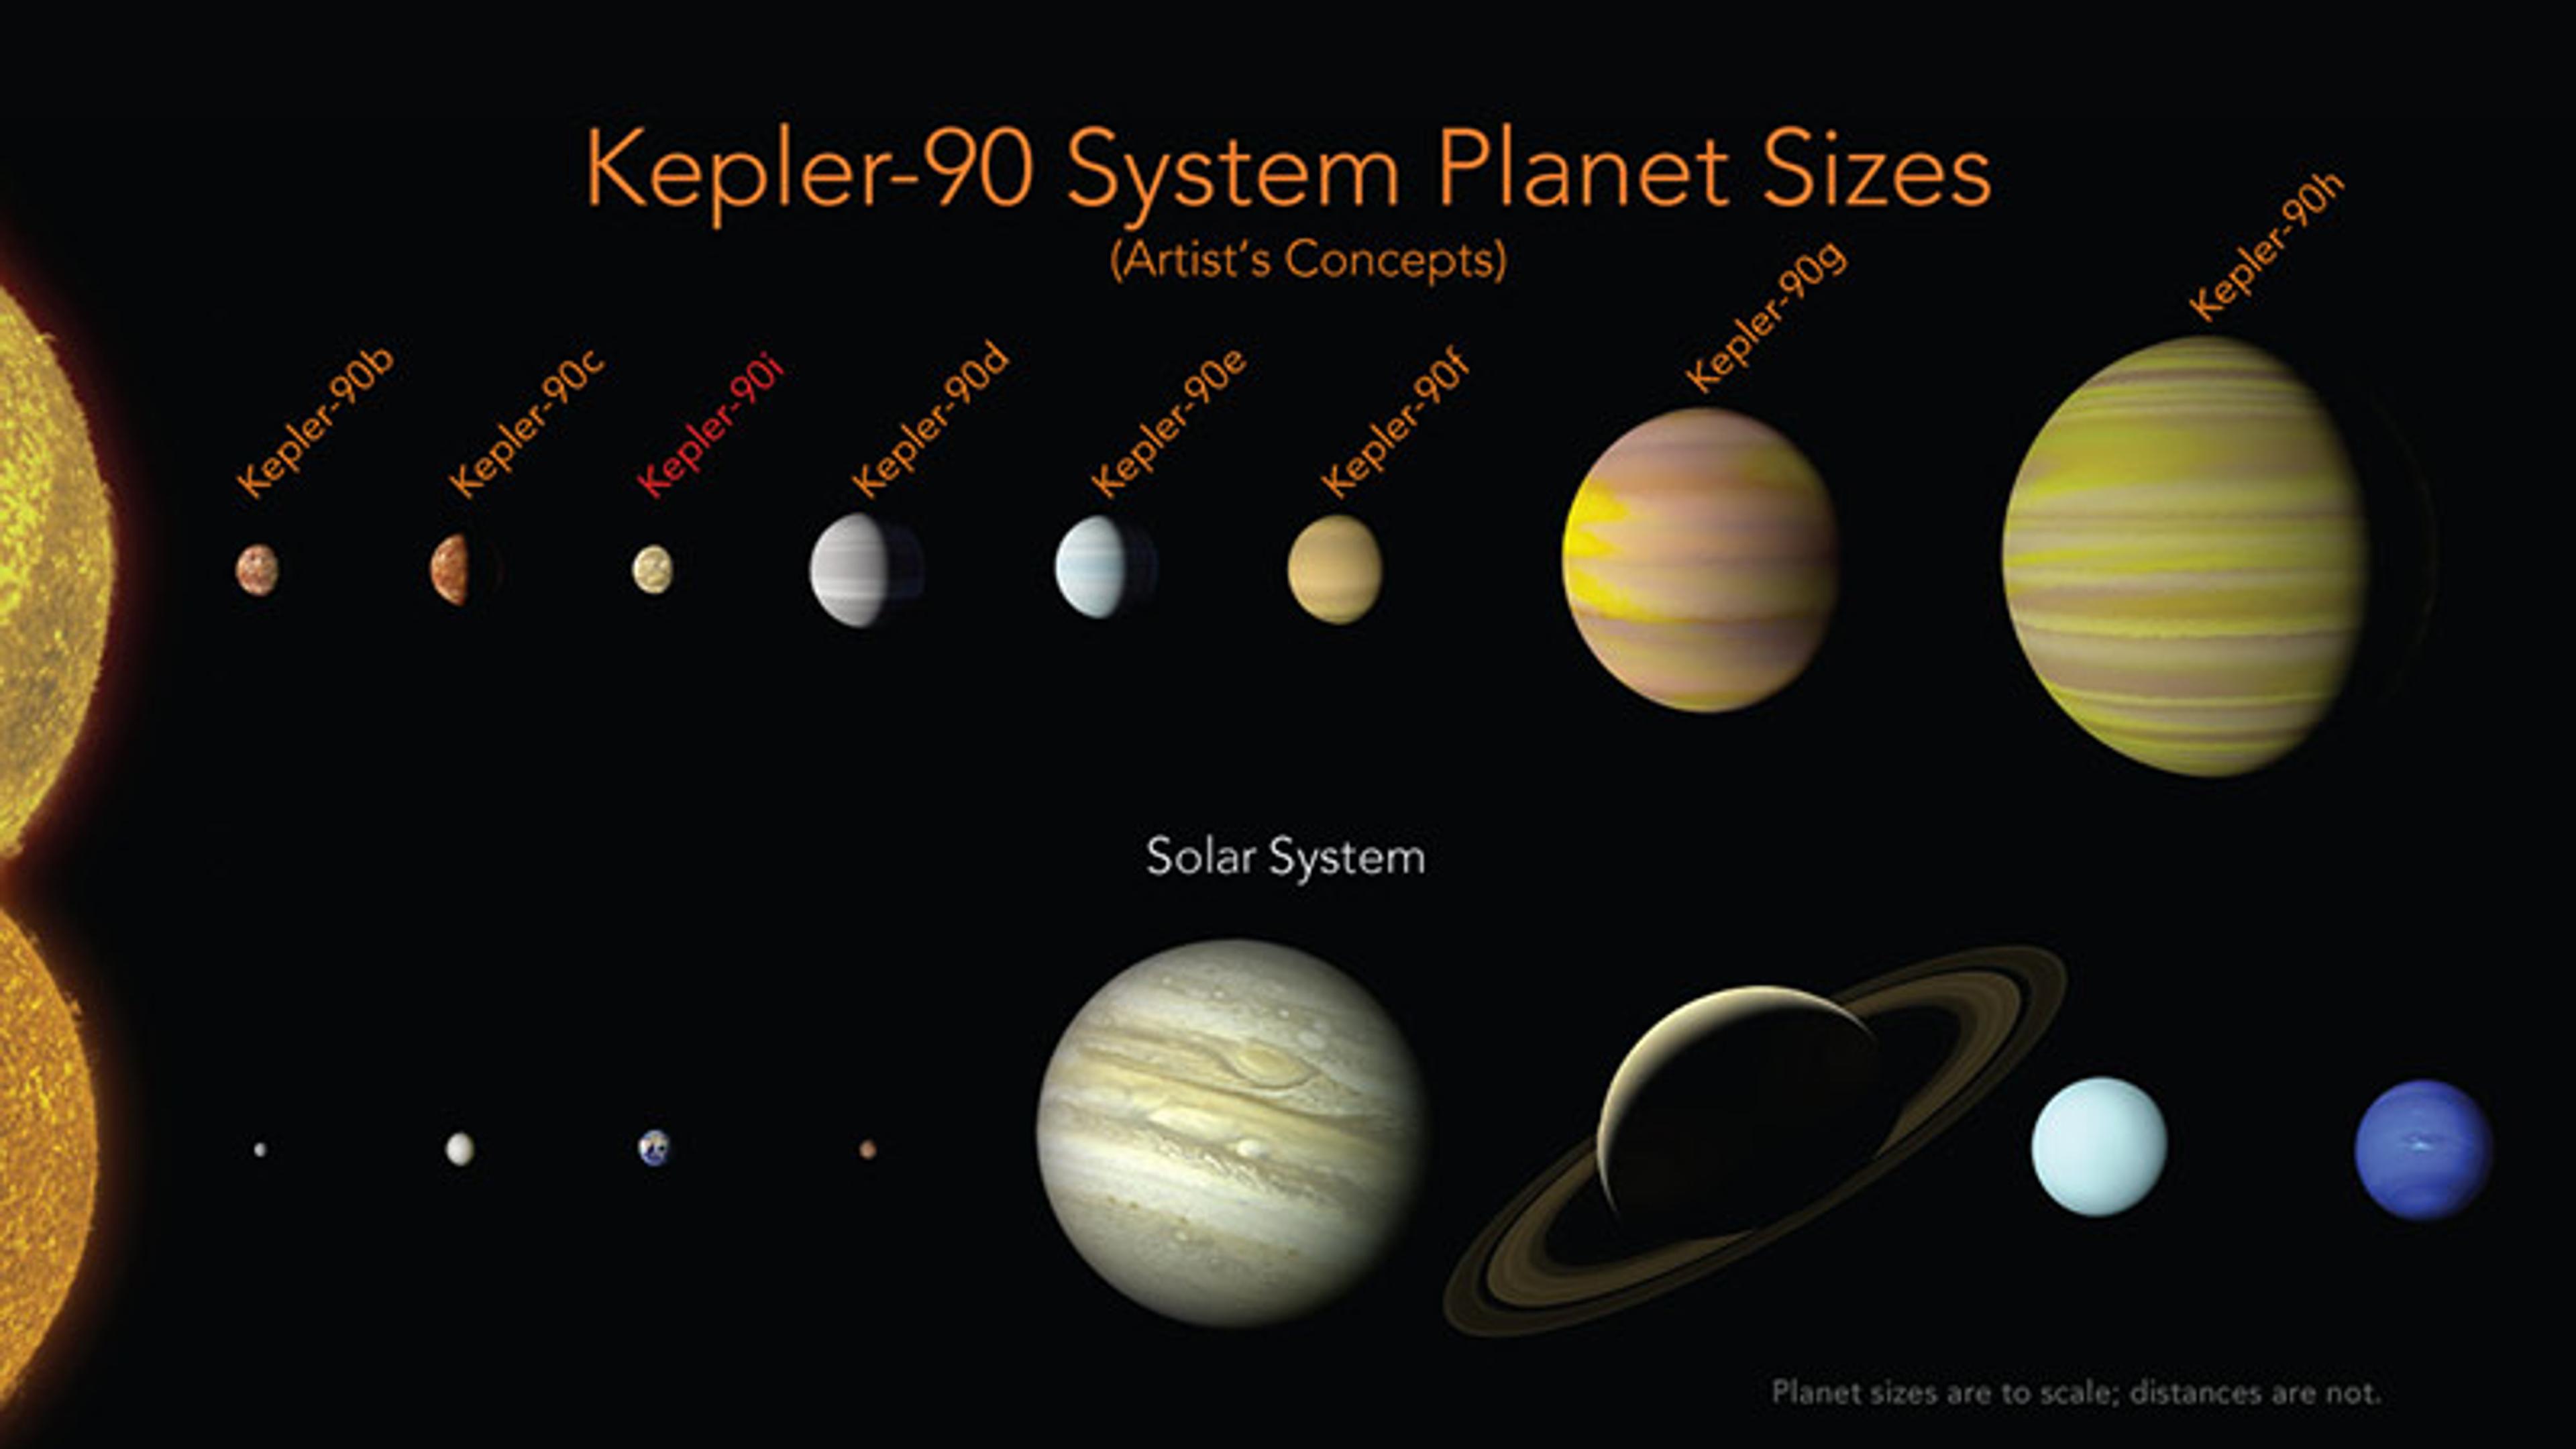 the solar system earth society and the human condition essay